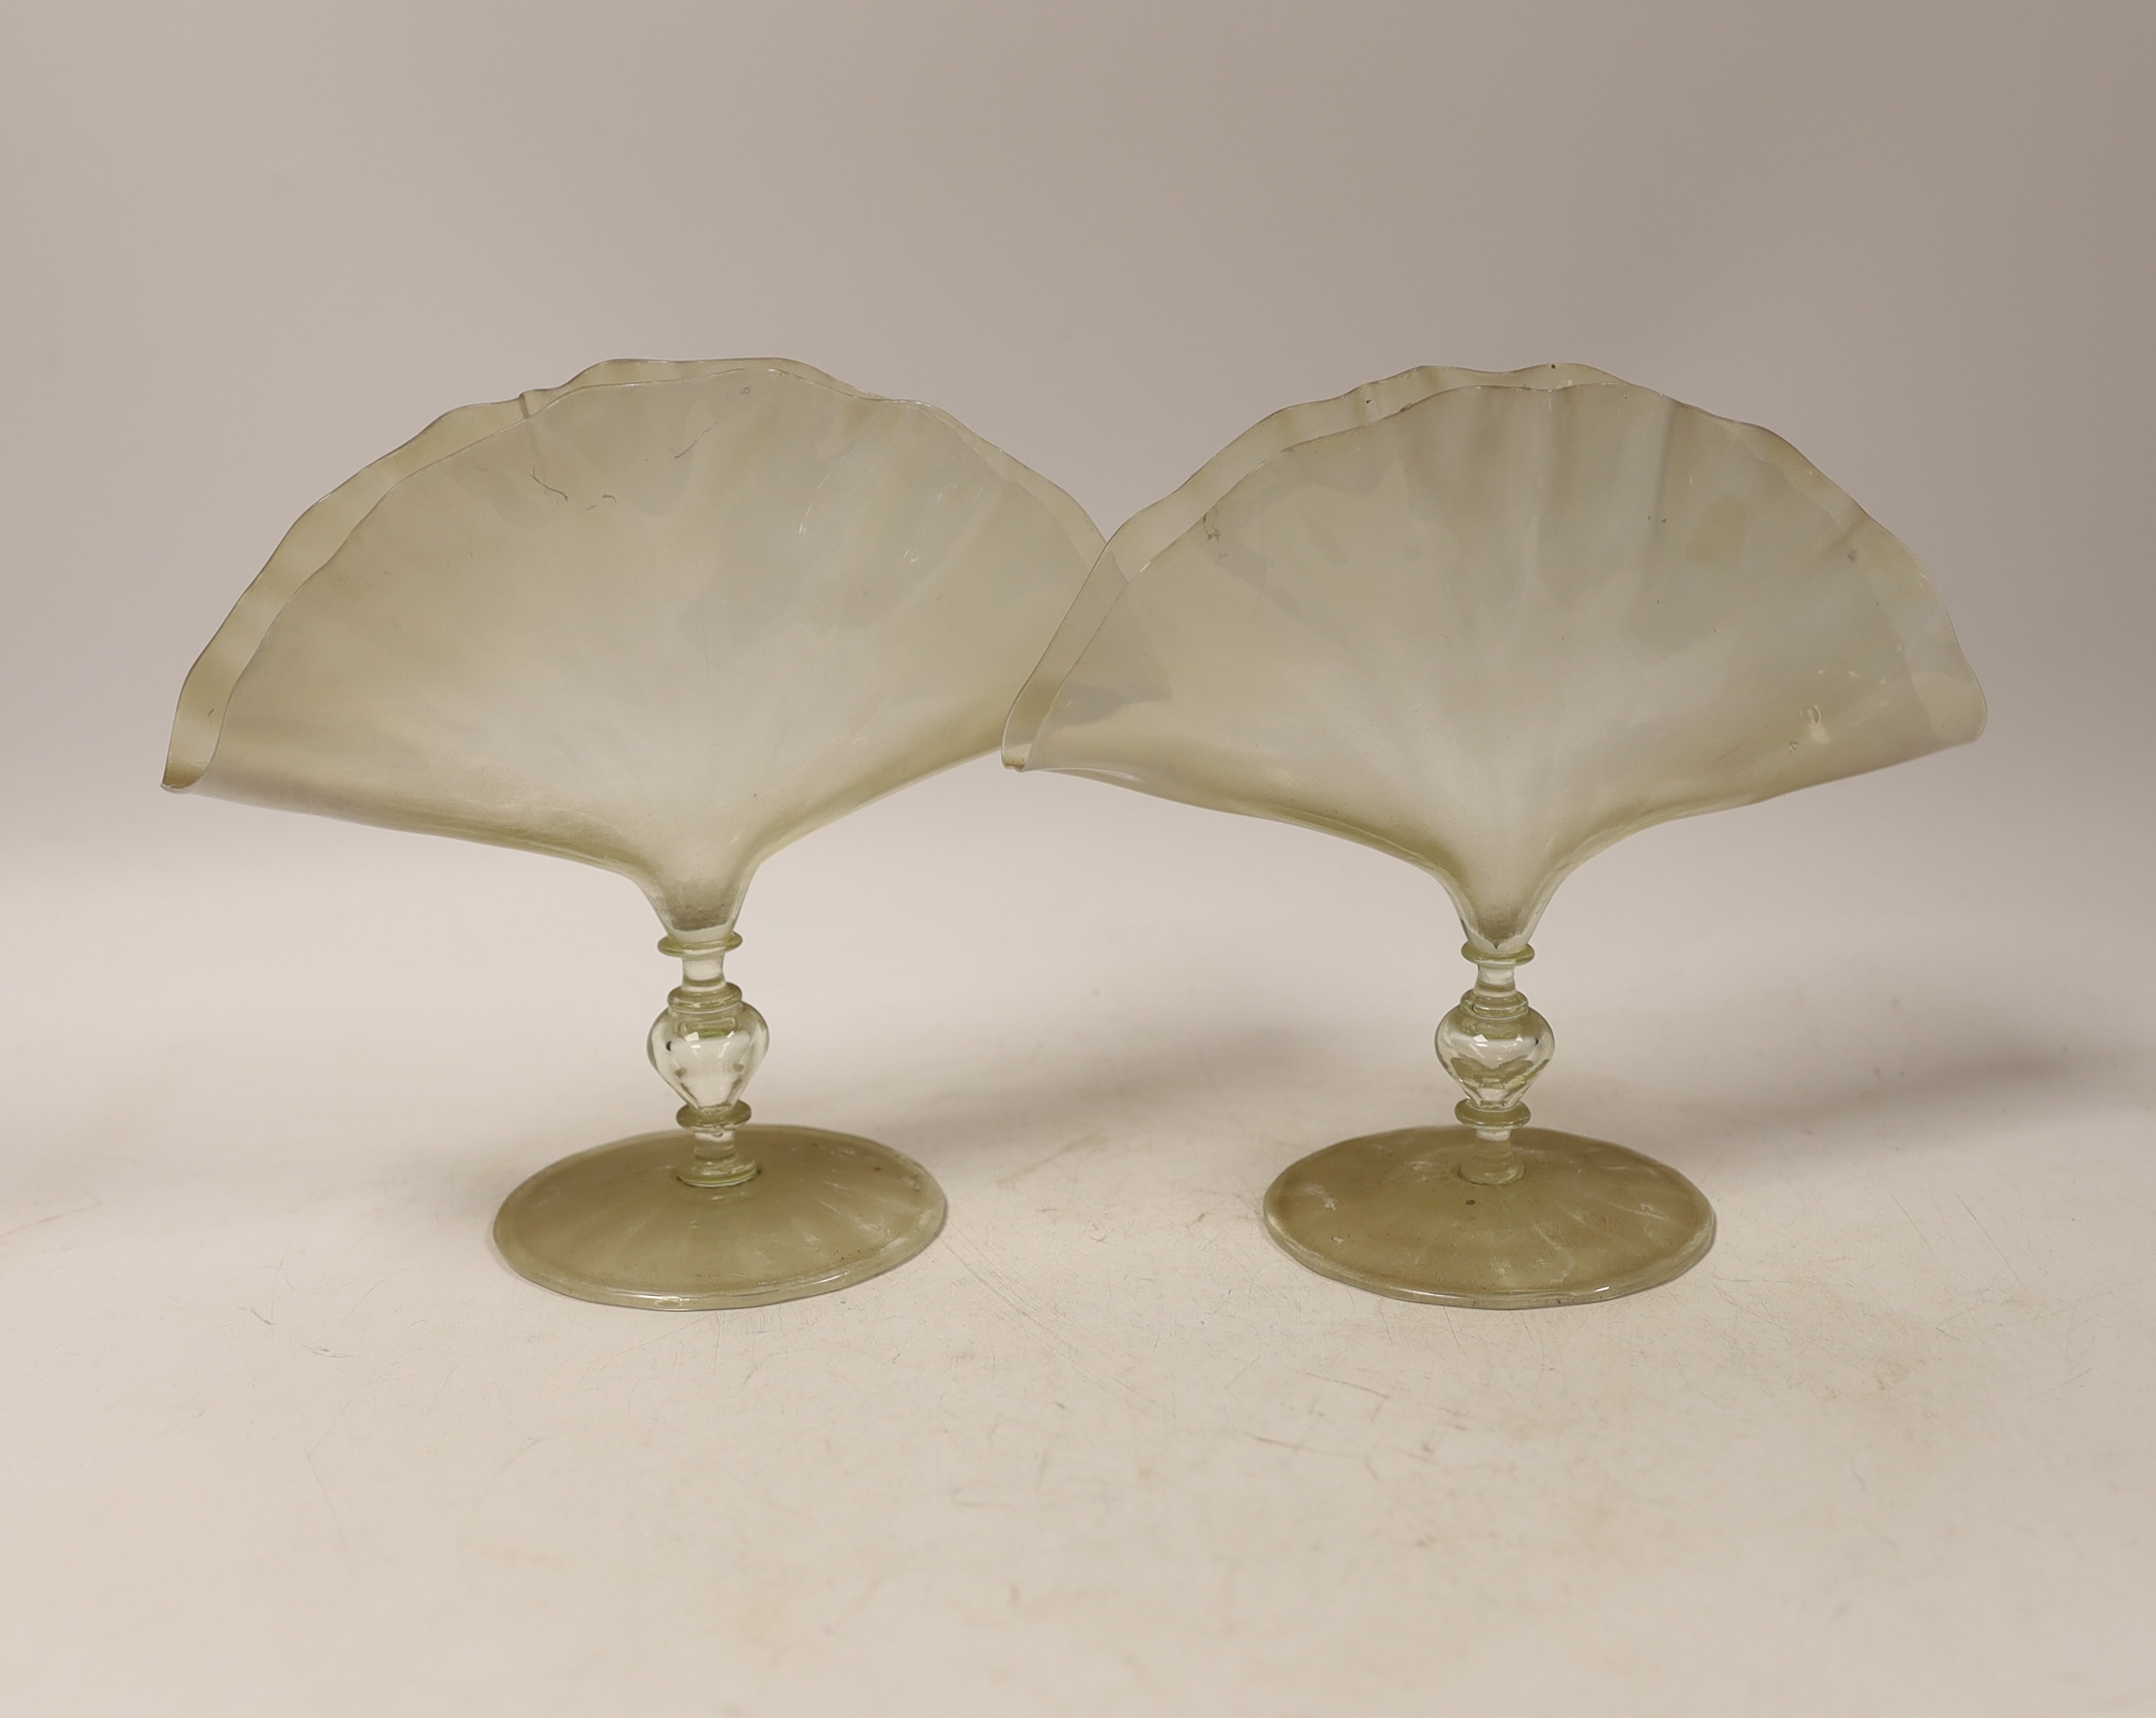 A pair of late 19th century vaseline glass fan shaped napkin holders on single knop stems, 16.5cm high x 19cm wide